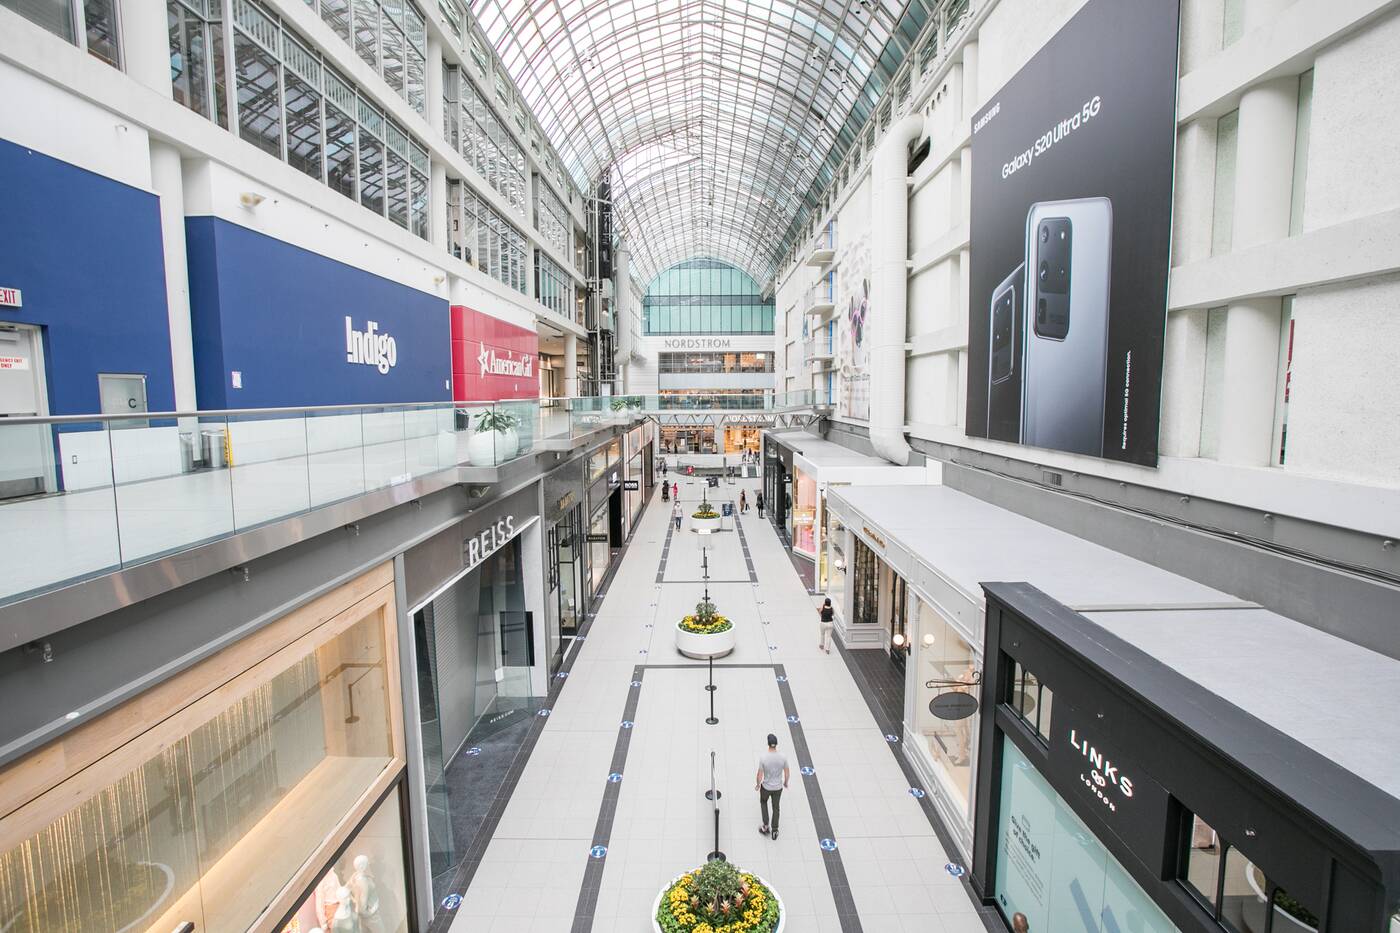 Toronto Eaton Centre, The Toronto Eaton Centre is a large s…